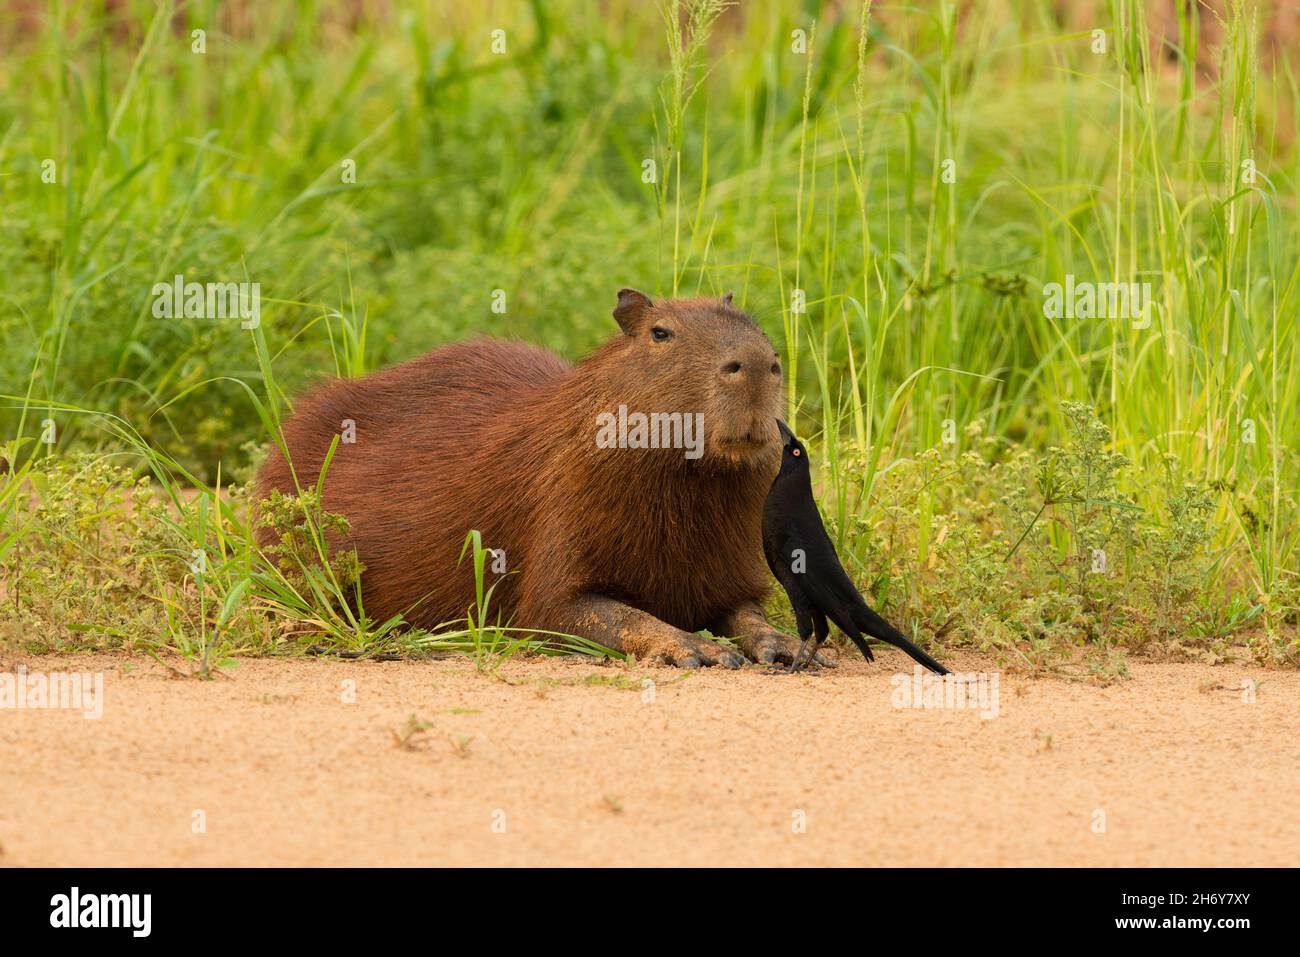 A Giant Cowbird (Molothrus oryzovorus) picking ticks from a Capybara fur, in a mutualistic relationship. Stock Photo